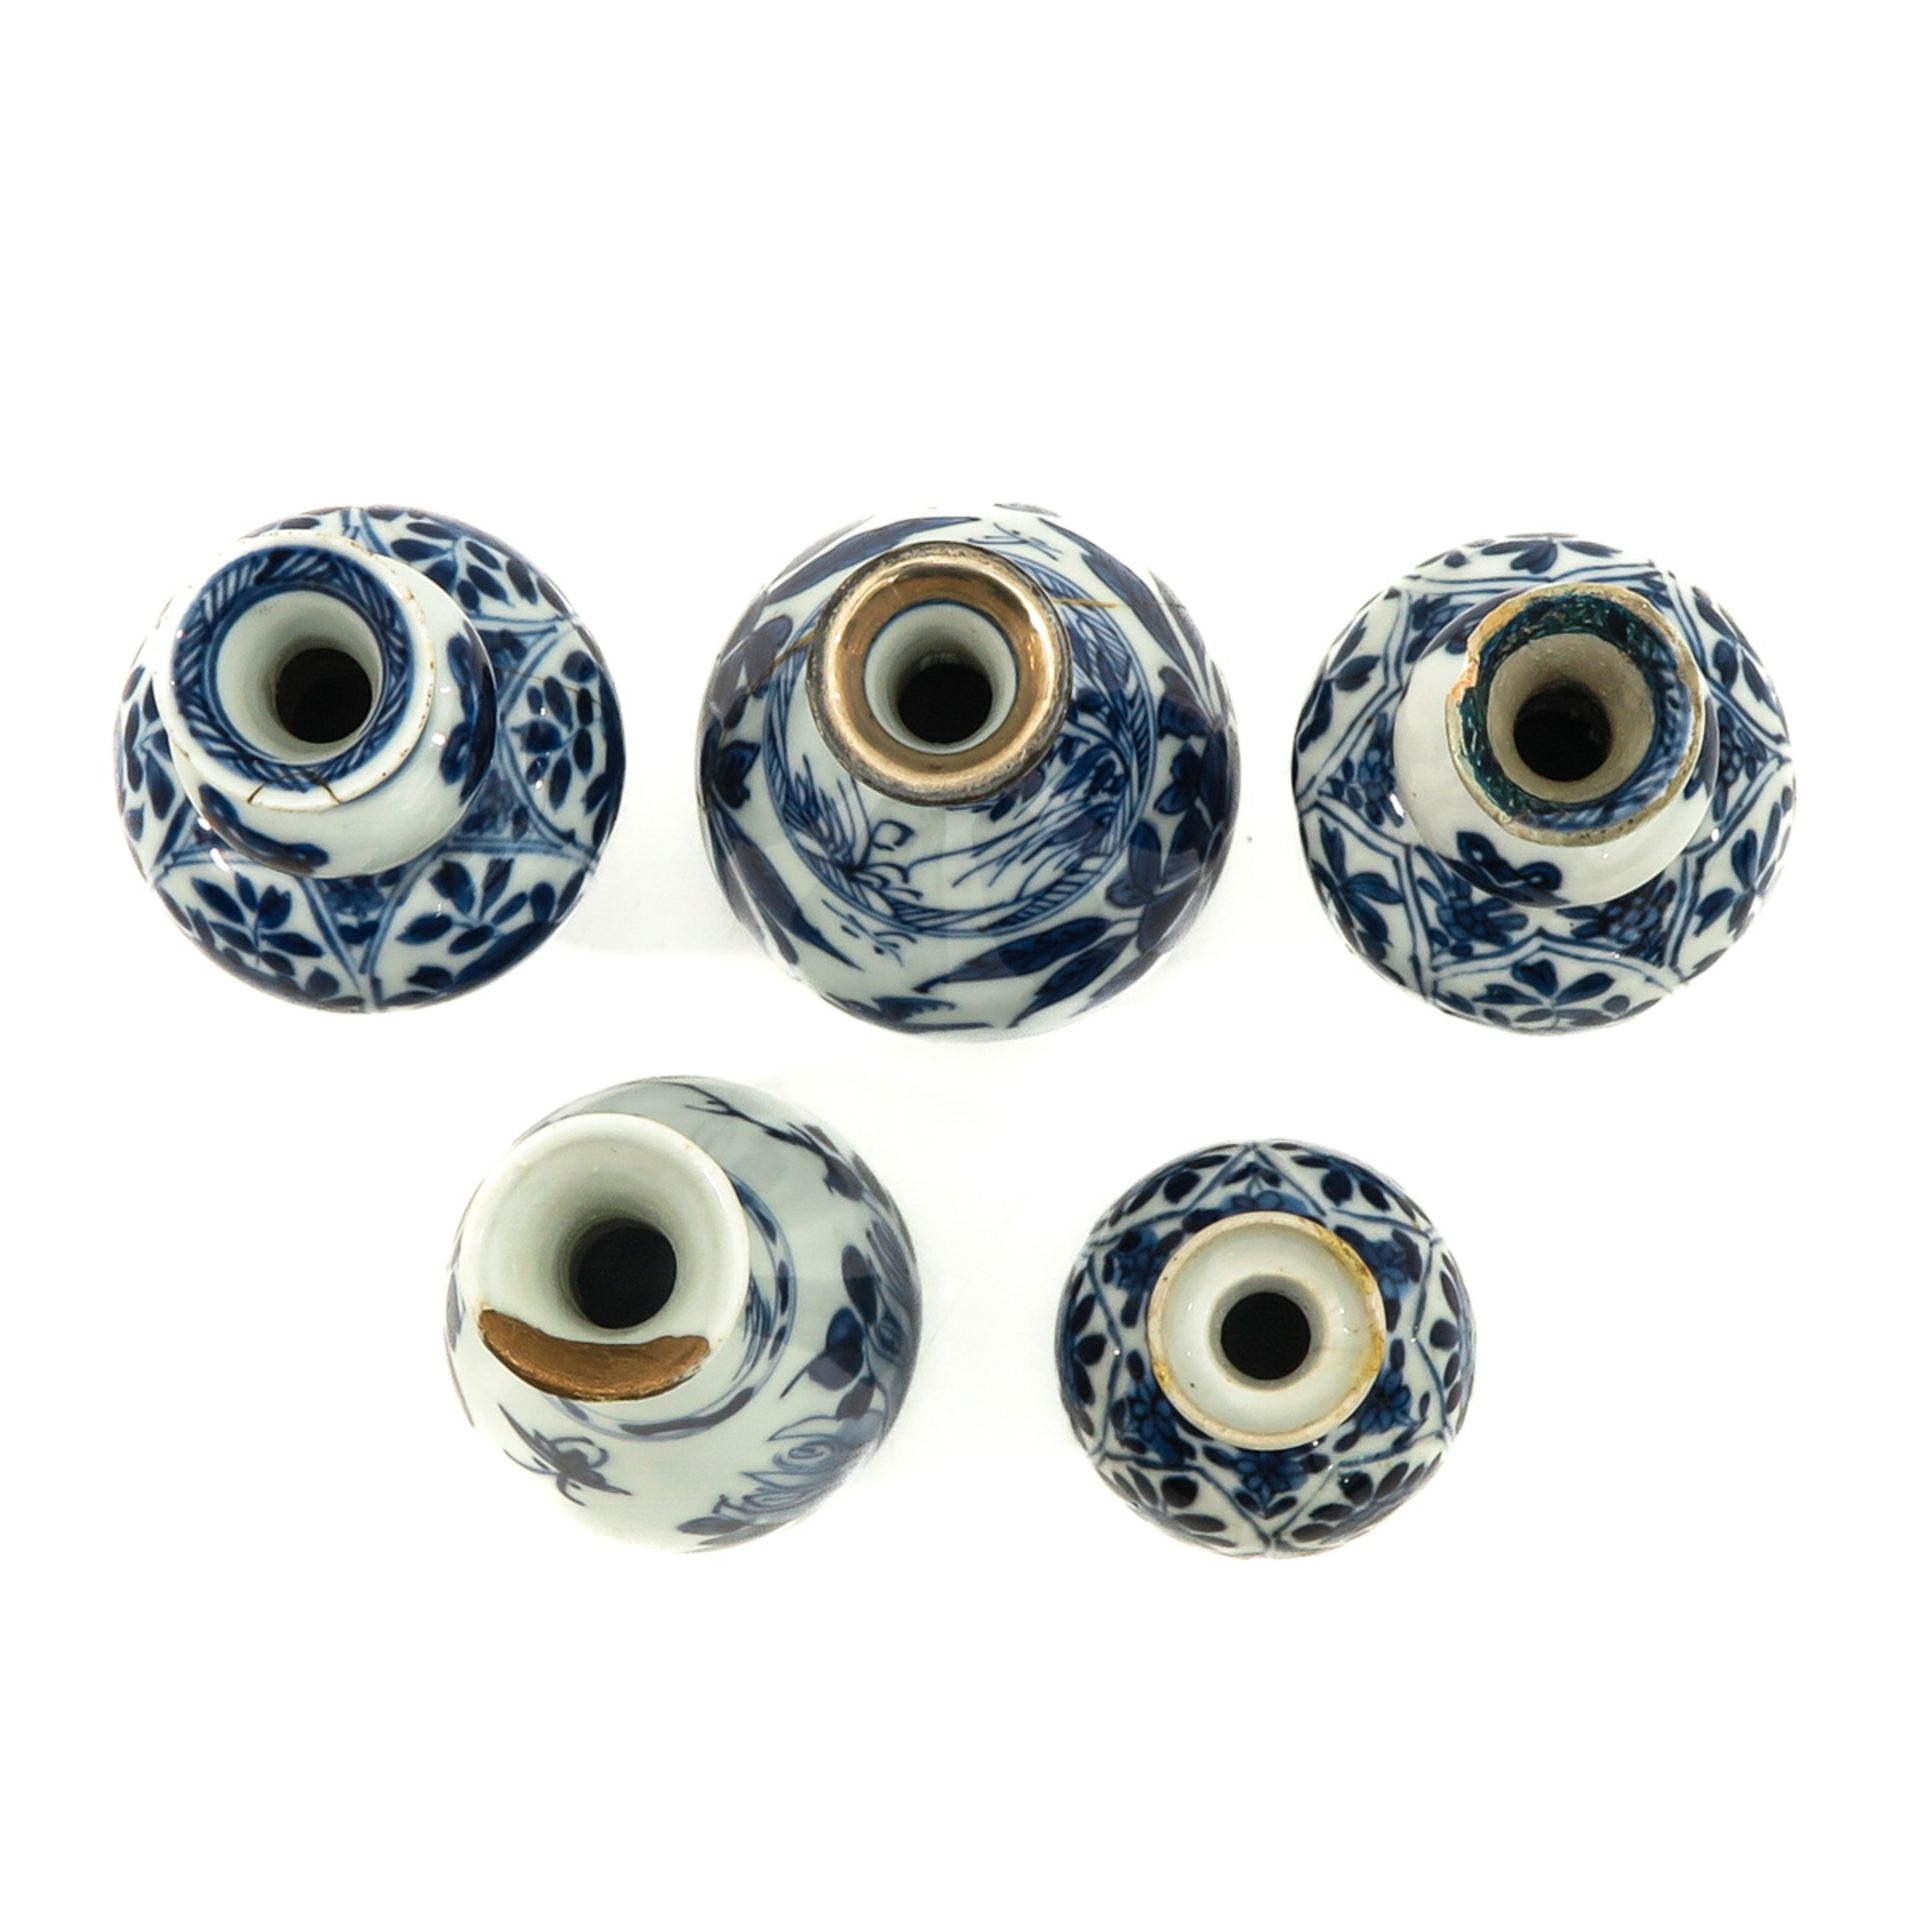 A Collection of 5 Miniature Vases - Image 5 of 9